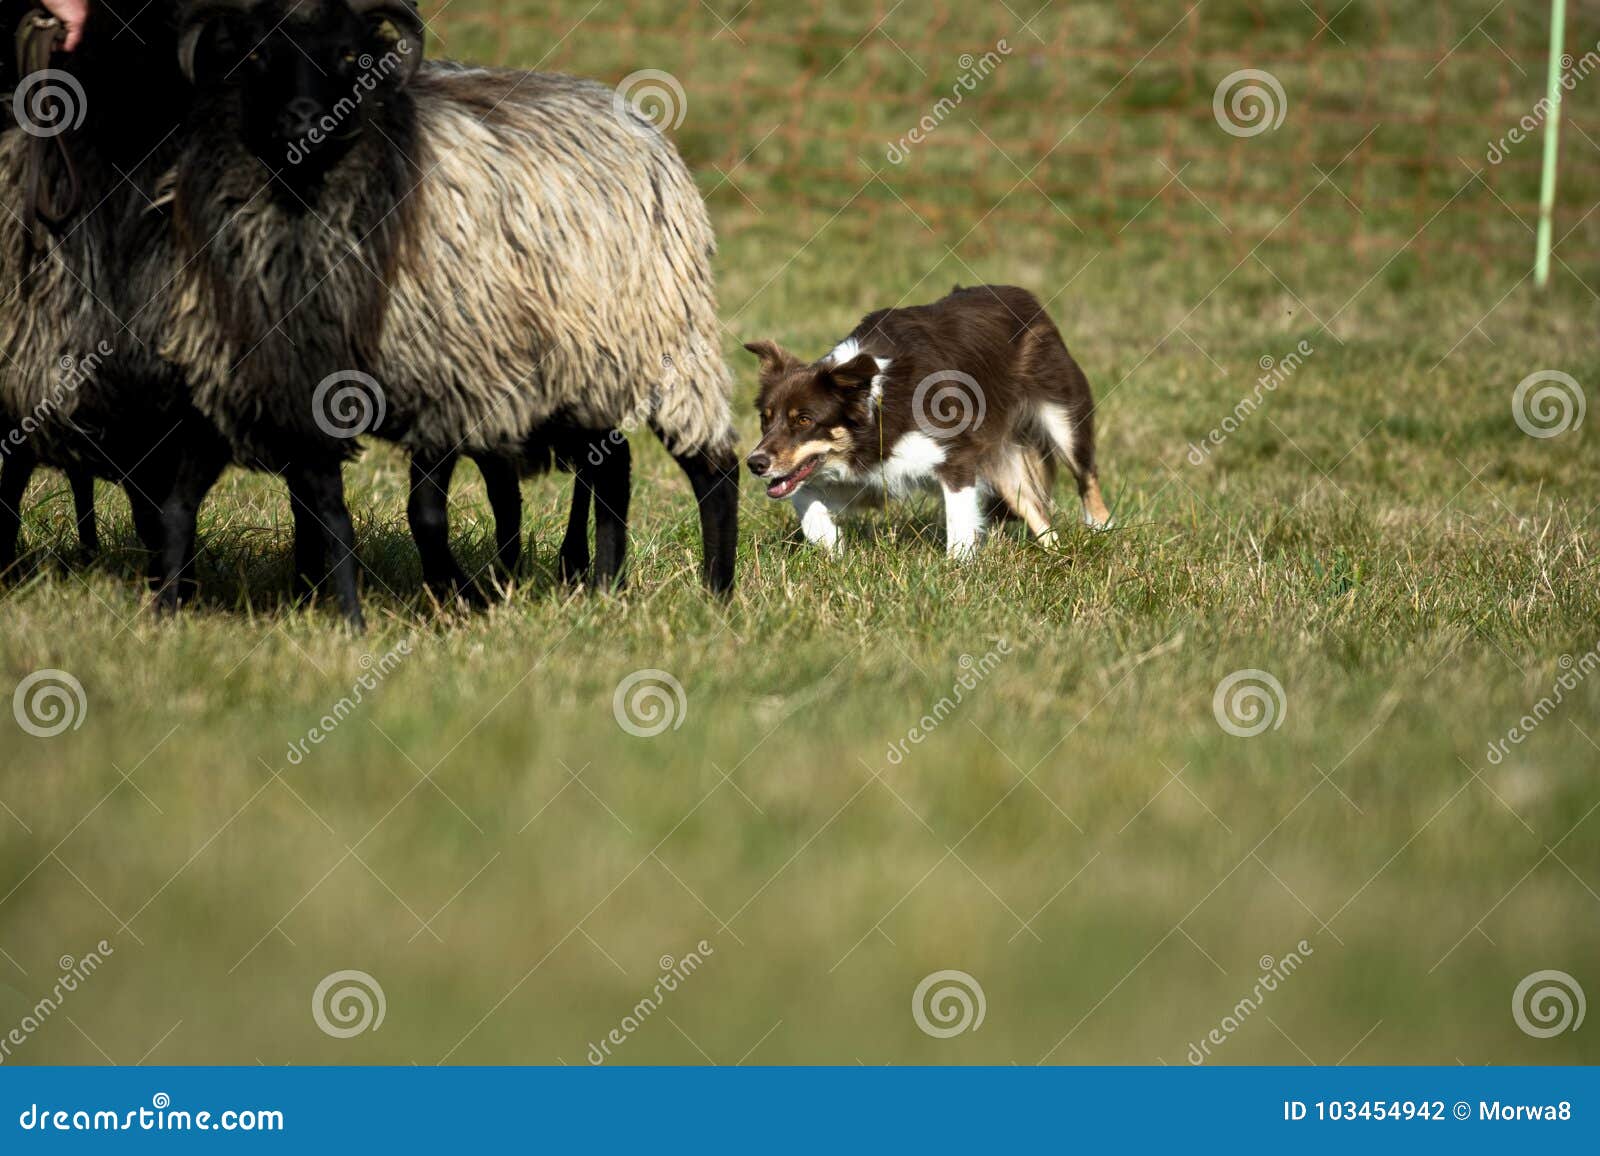 border collie with sheep herding